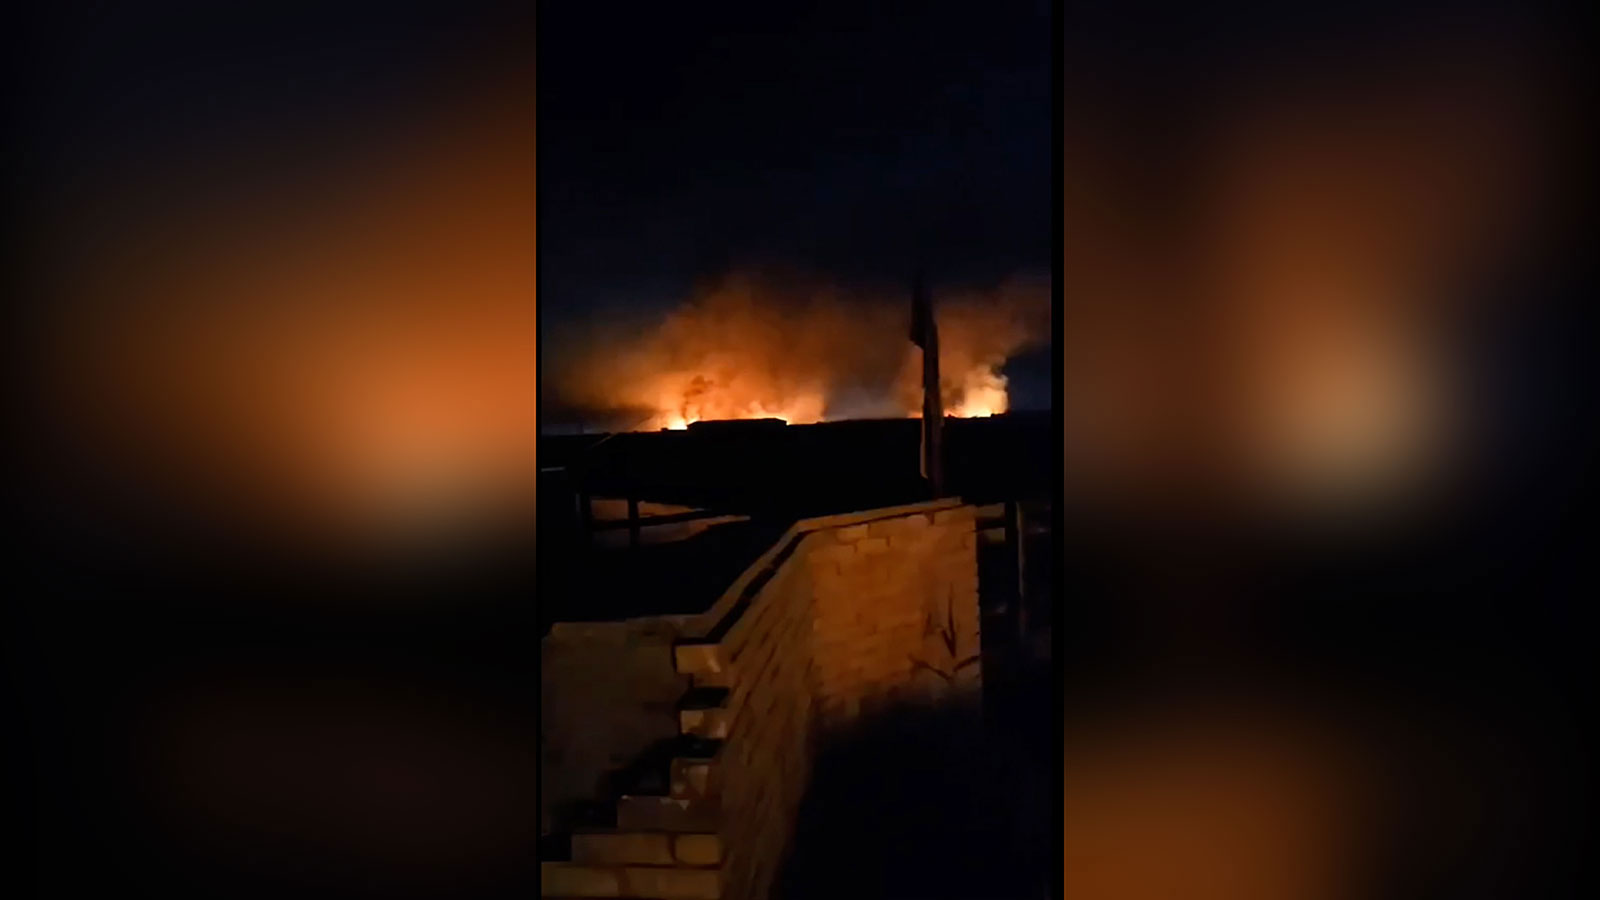 Flames from a large explosion near Babylon, Iraq, can be seen in an image taken from video obtained by CNN from social media.